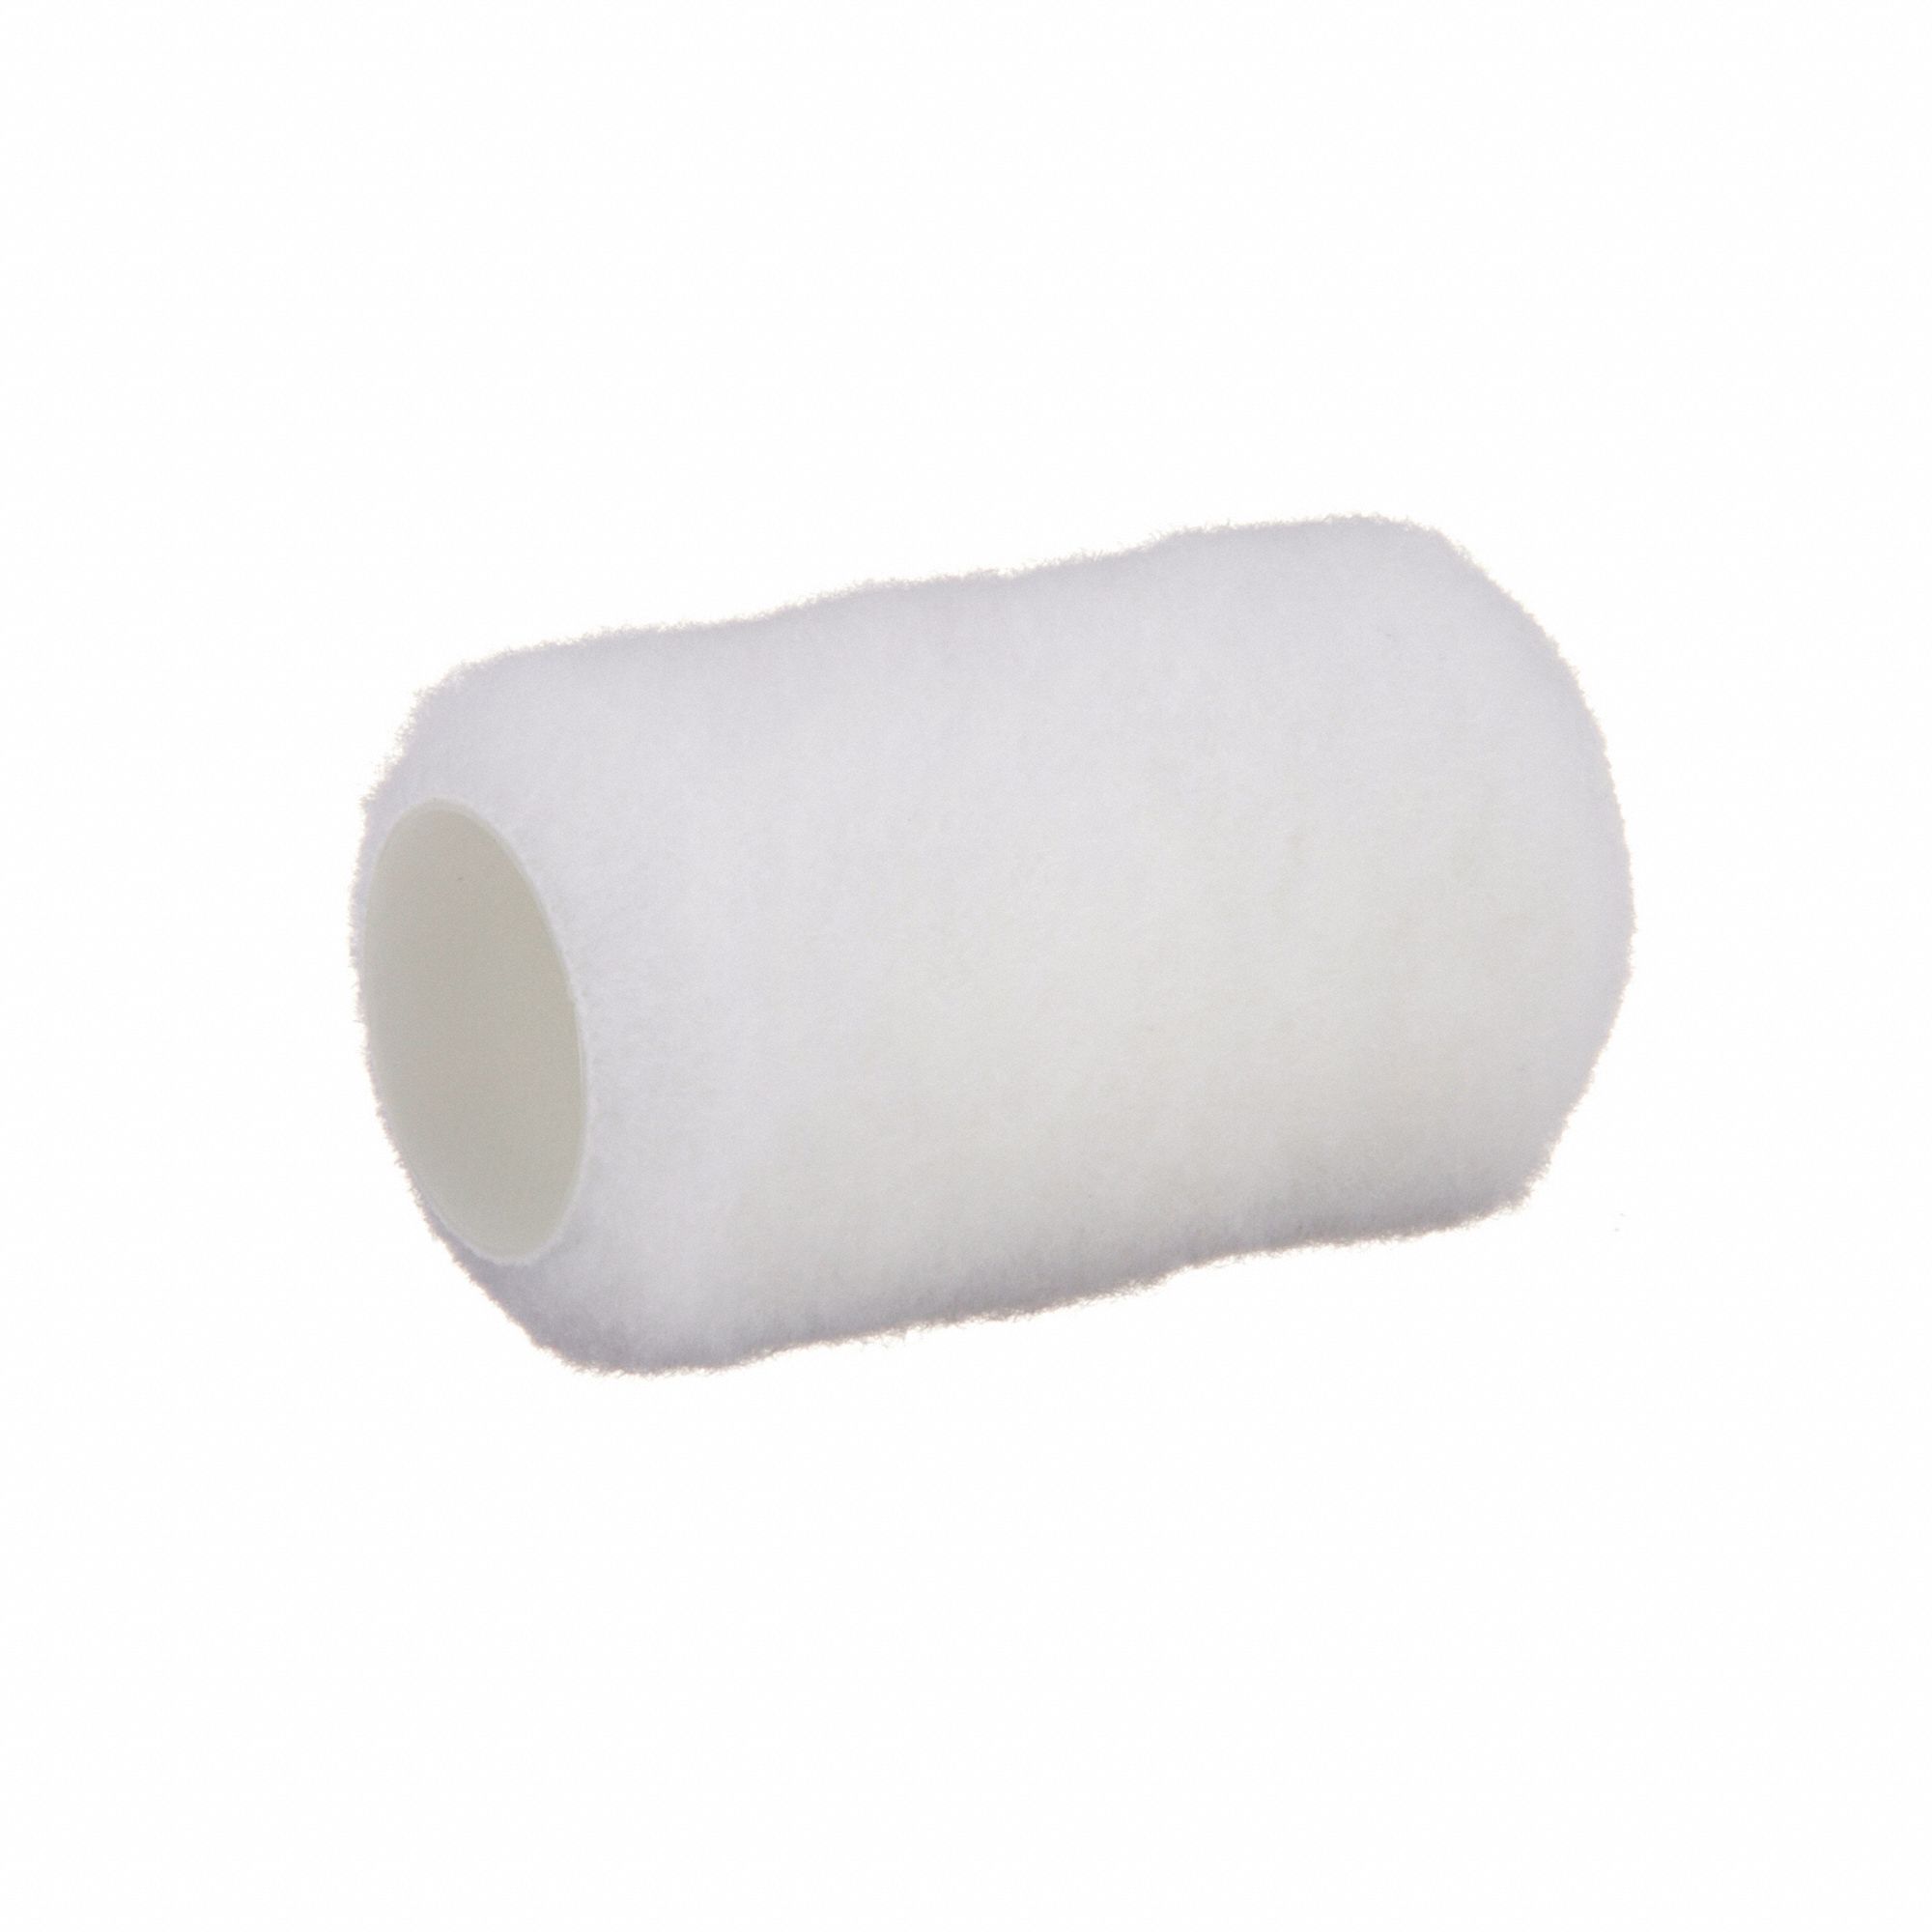 Shur-Line Better 9 x 3/8 in. Lint Free Knit Paint Roller Cover, 3